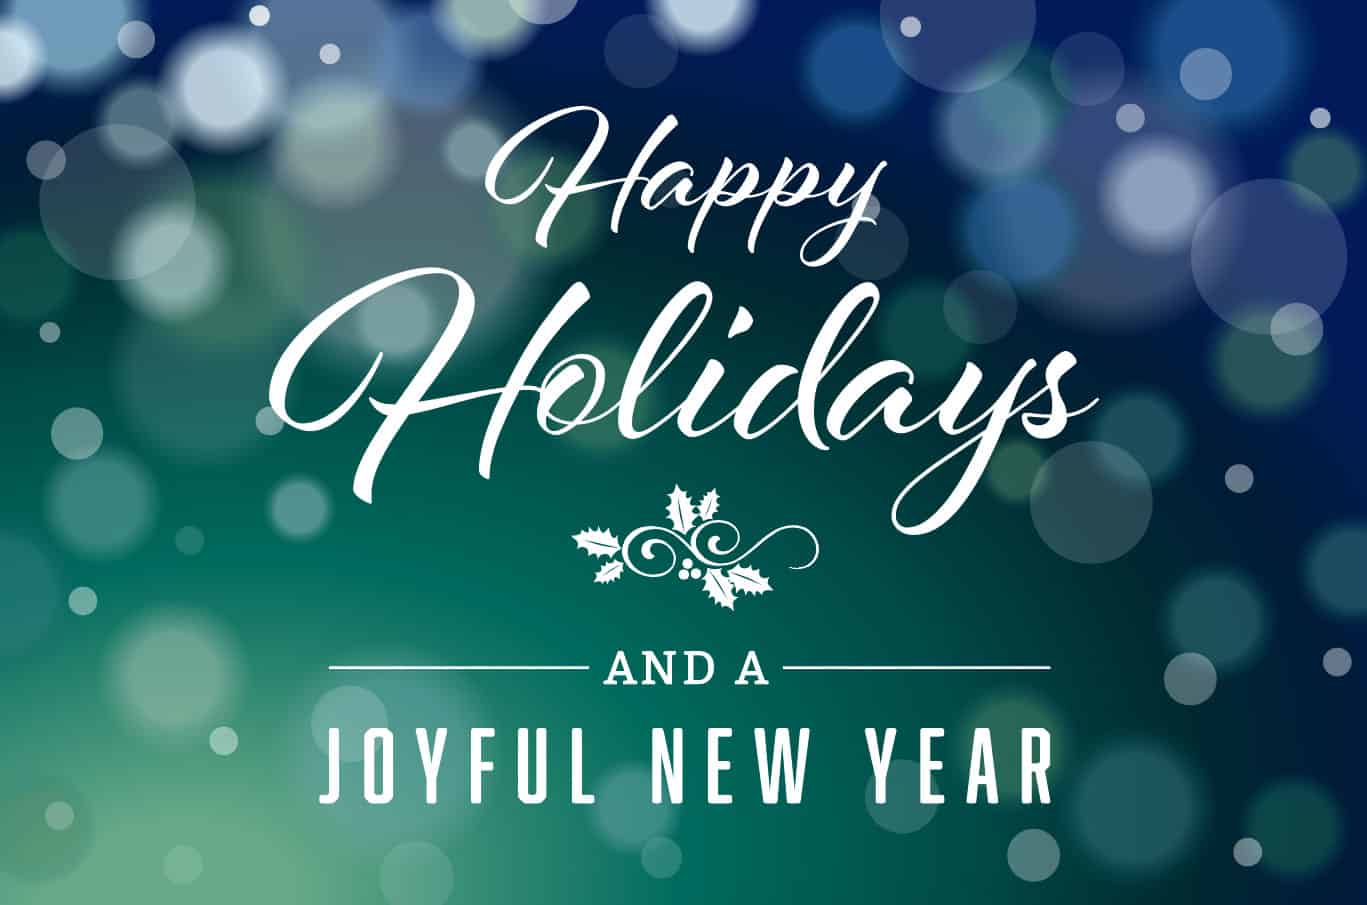 Happy Holidays and a Joyful New Year from A.D. Cook